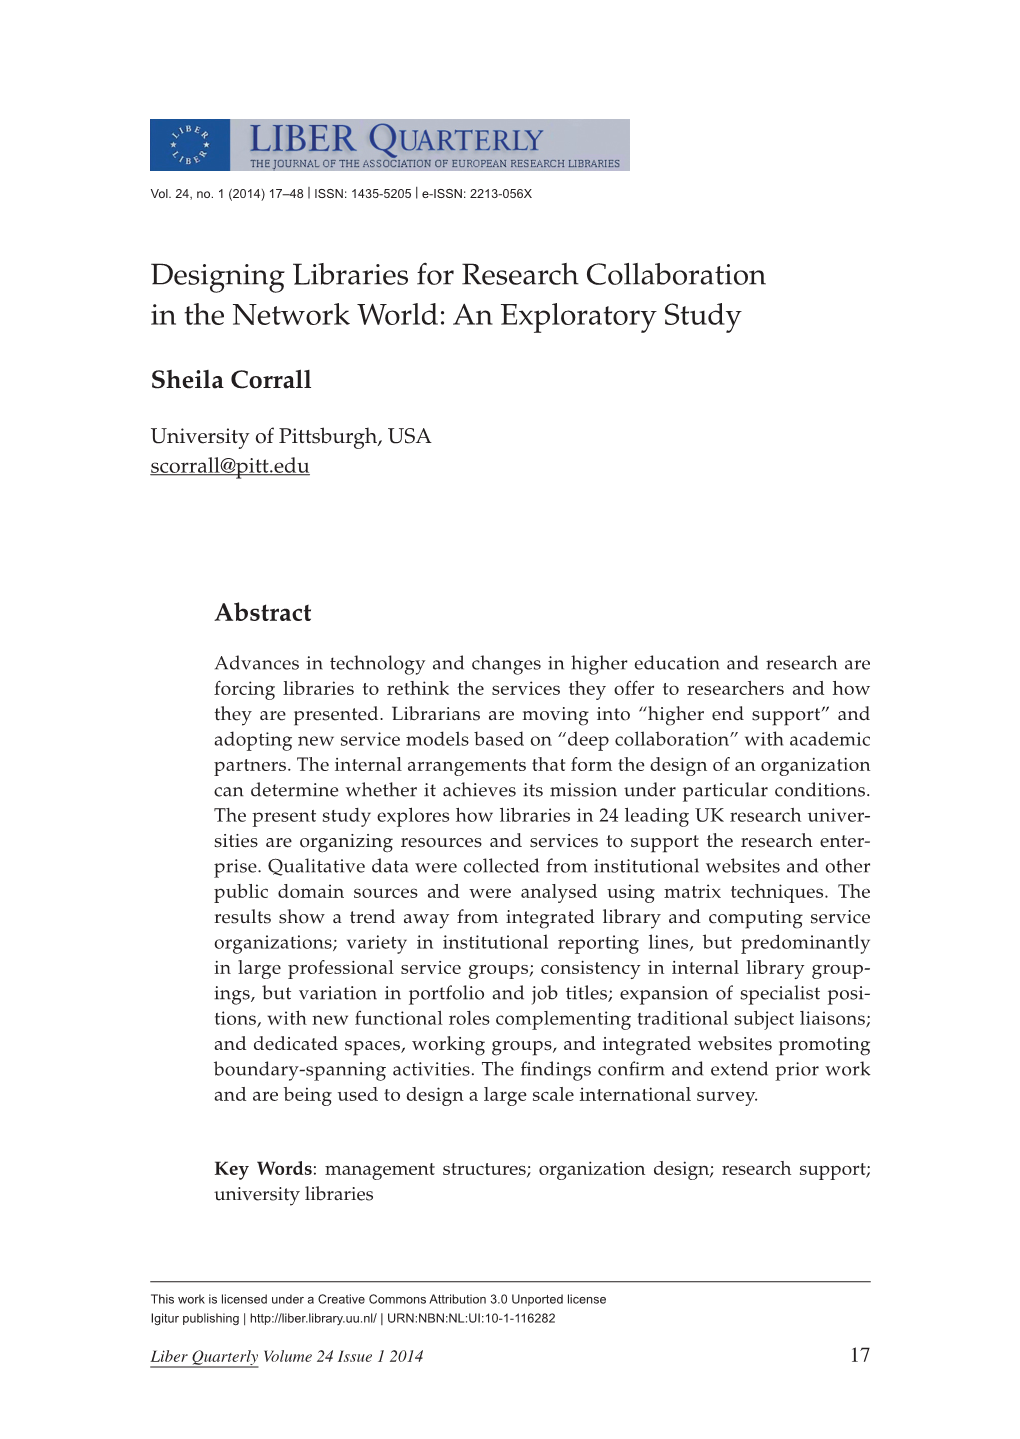 Designing Libraries for Research Collaboration in the Network World: an Exploratory Study